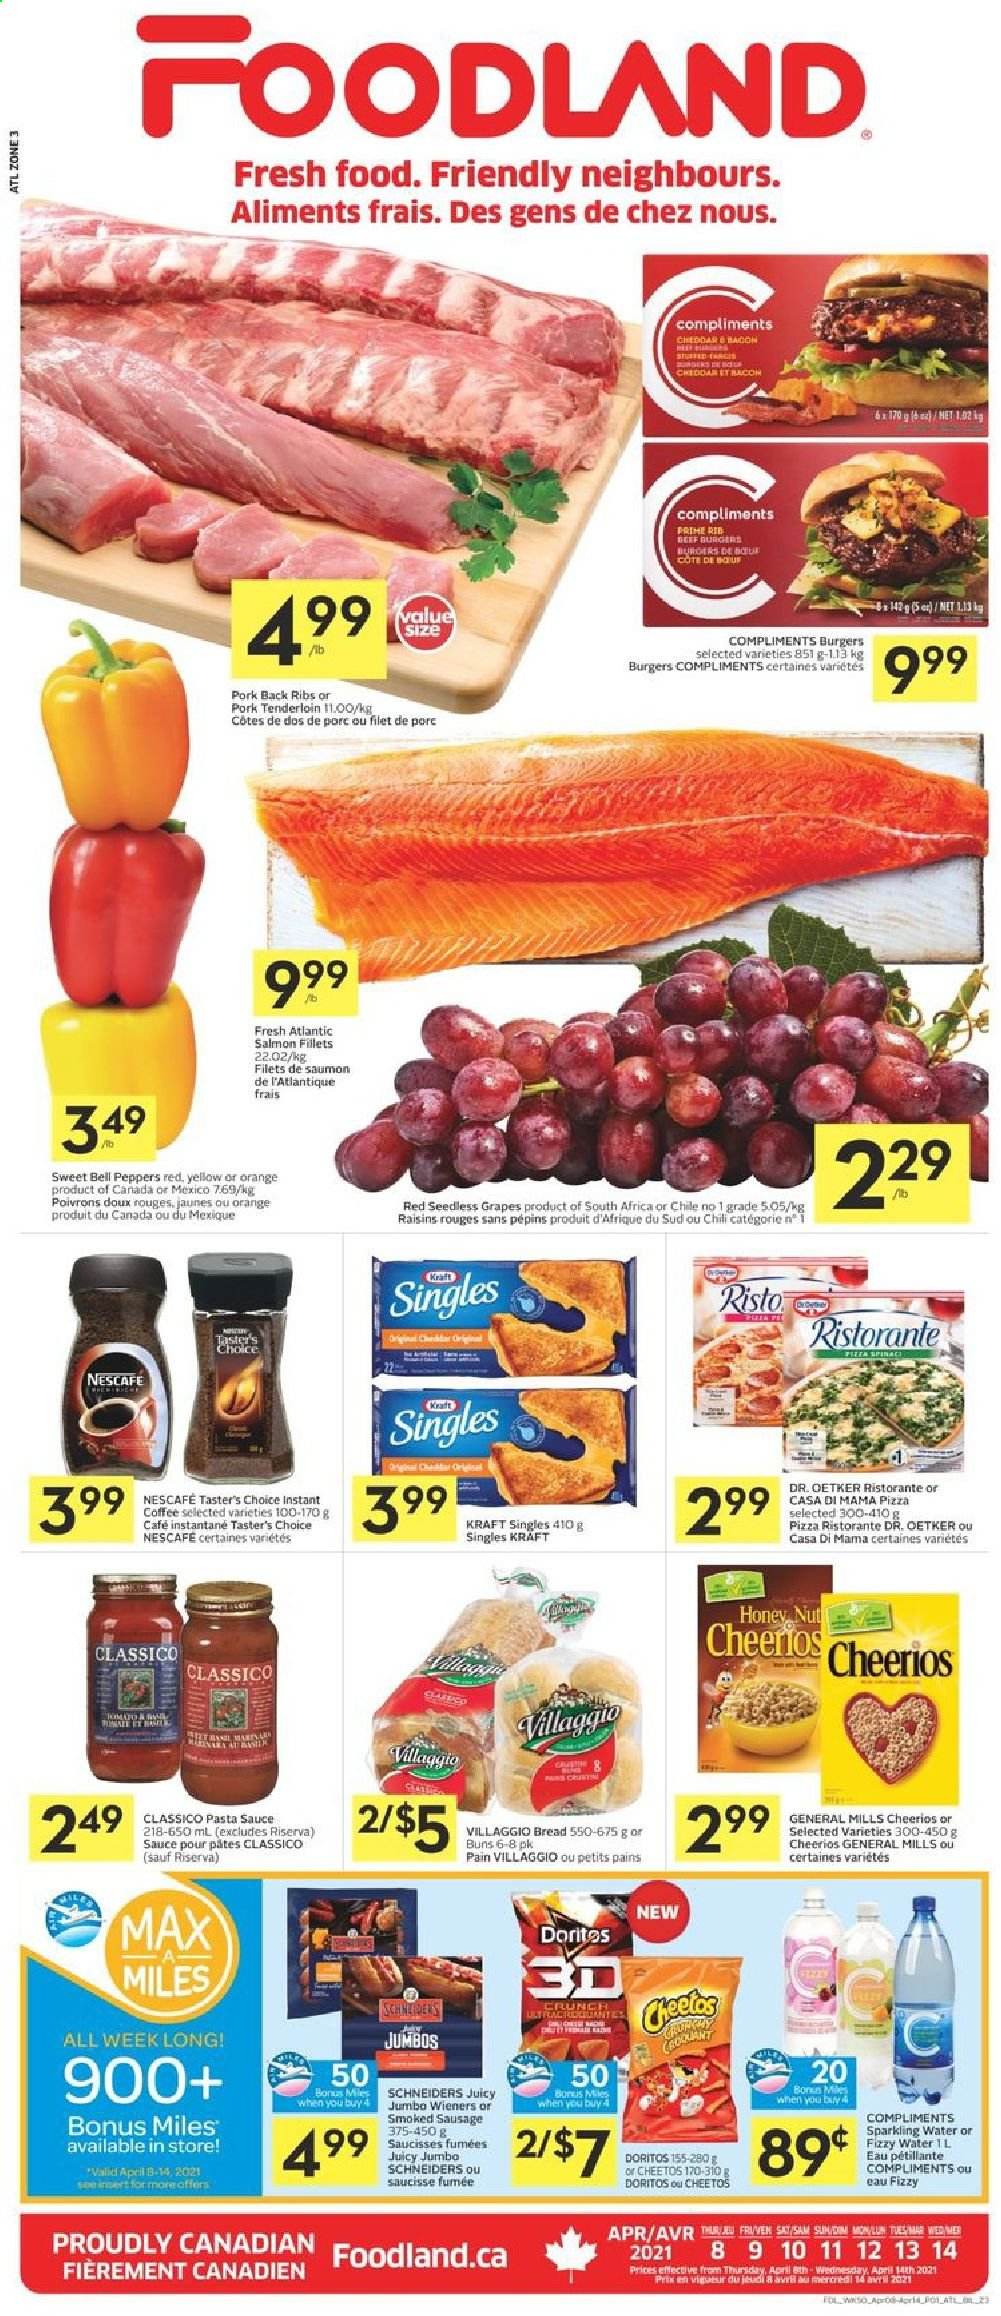 thumbnail - Foodland Flyer - April 08, 2021 - April 14, 2021 - Sales products - bread, buns, bell peppers, peppers, grapes, seedless grapes, salmon, salmon fillet, pizza, pasta sauce, hamburger, sauce, beef burger, Kraft®, sausage, smoked sausage, sandwich slices, Dr. Oetker, Kraft Singles, Doritos, Cheetos, Cheerios, Classico, dried fruit, sparkling water, instant coffee, pork meat, pork ribs, pork tenderloin, pork back ribs, raisins, Nescafé. Page 1.